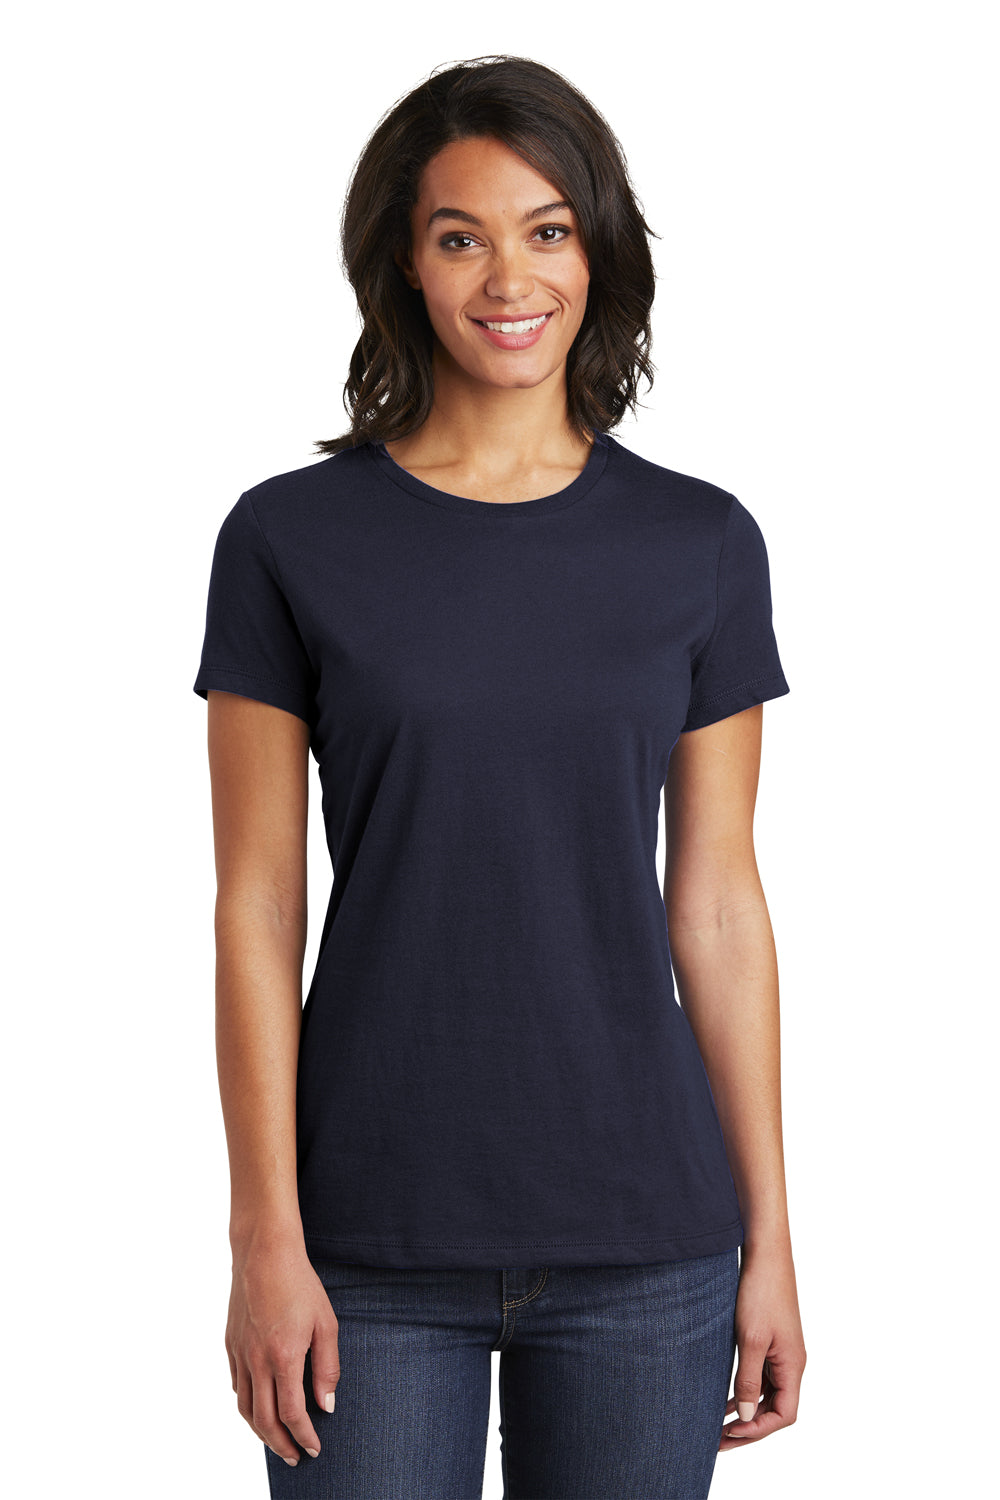 District DT6002 Womens Very Important Short Sleeve Crewneck T-Shirt Navy Blue Front